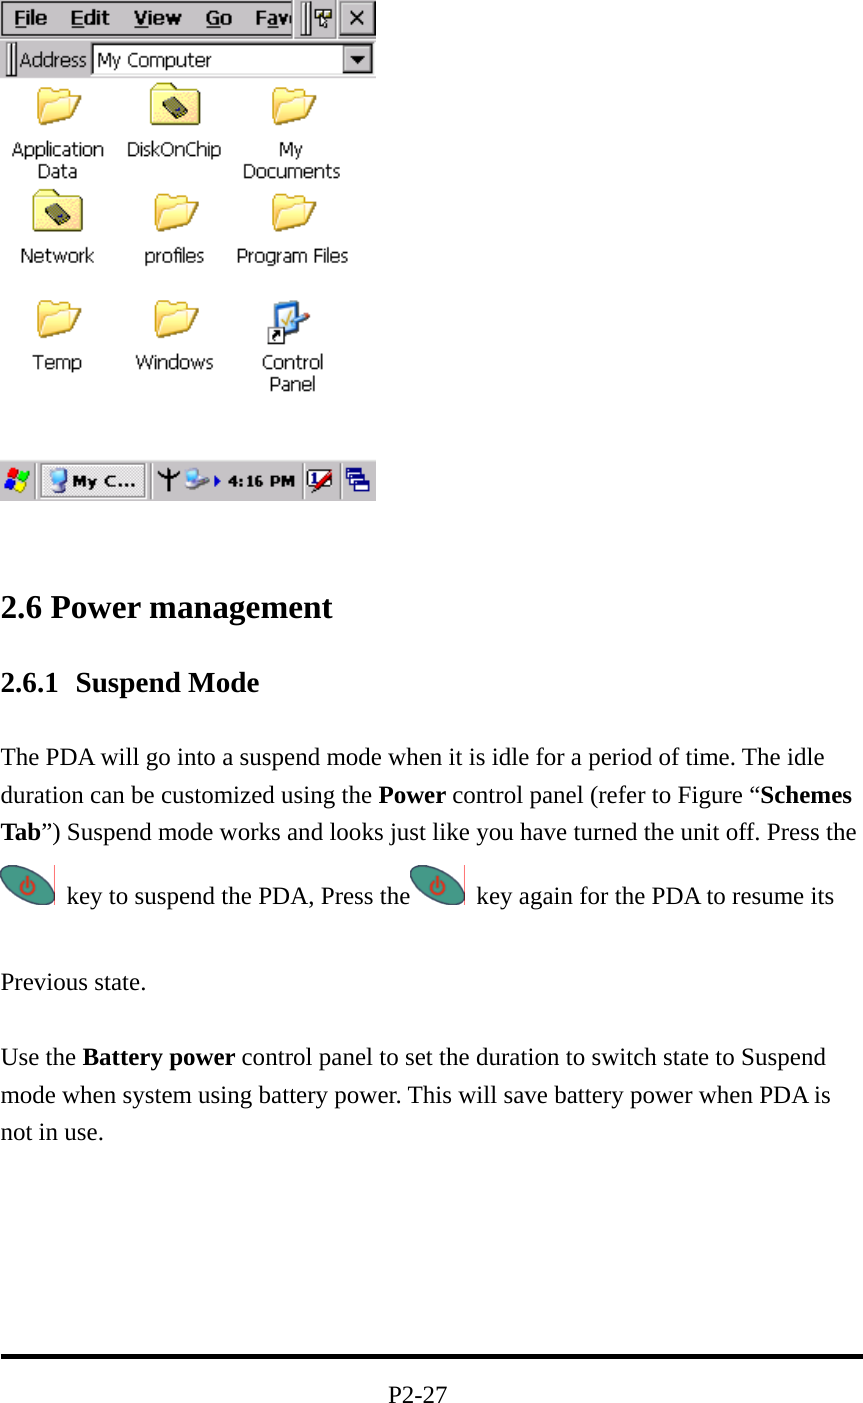   2.6 Power management 2.6.1 Suspend Mode  The PDA will go into a suspend mode when it is idle for a period of time. The idle duration can be customized using the Power control panel (refer to Figure “Schemes Tab”) Suspend mode works and looks just like you have turned the unit off. Press the     key to suspend the PDA, Press the   key again for the PDA to resume its                               Previous state.  Use the Battery power control panel to set the duration to switch state to Suspend mode when system using battery power. This will save battery power when PDA is not in use.         P2-27 